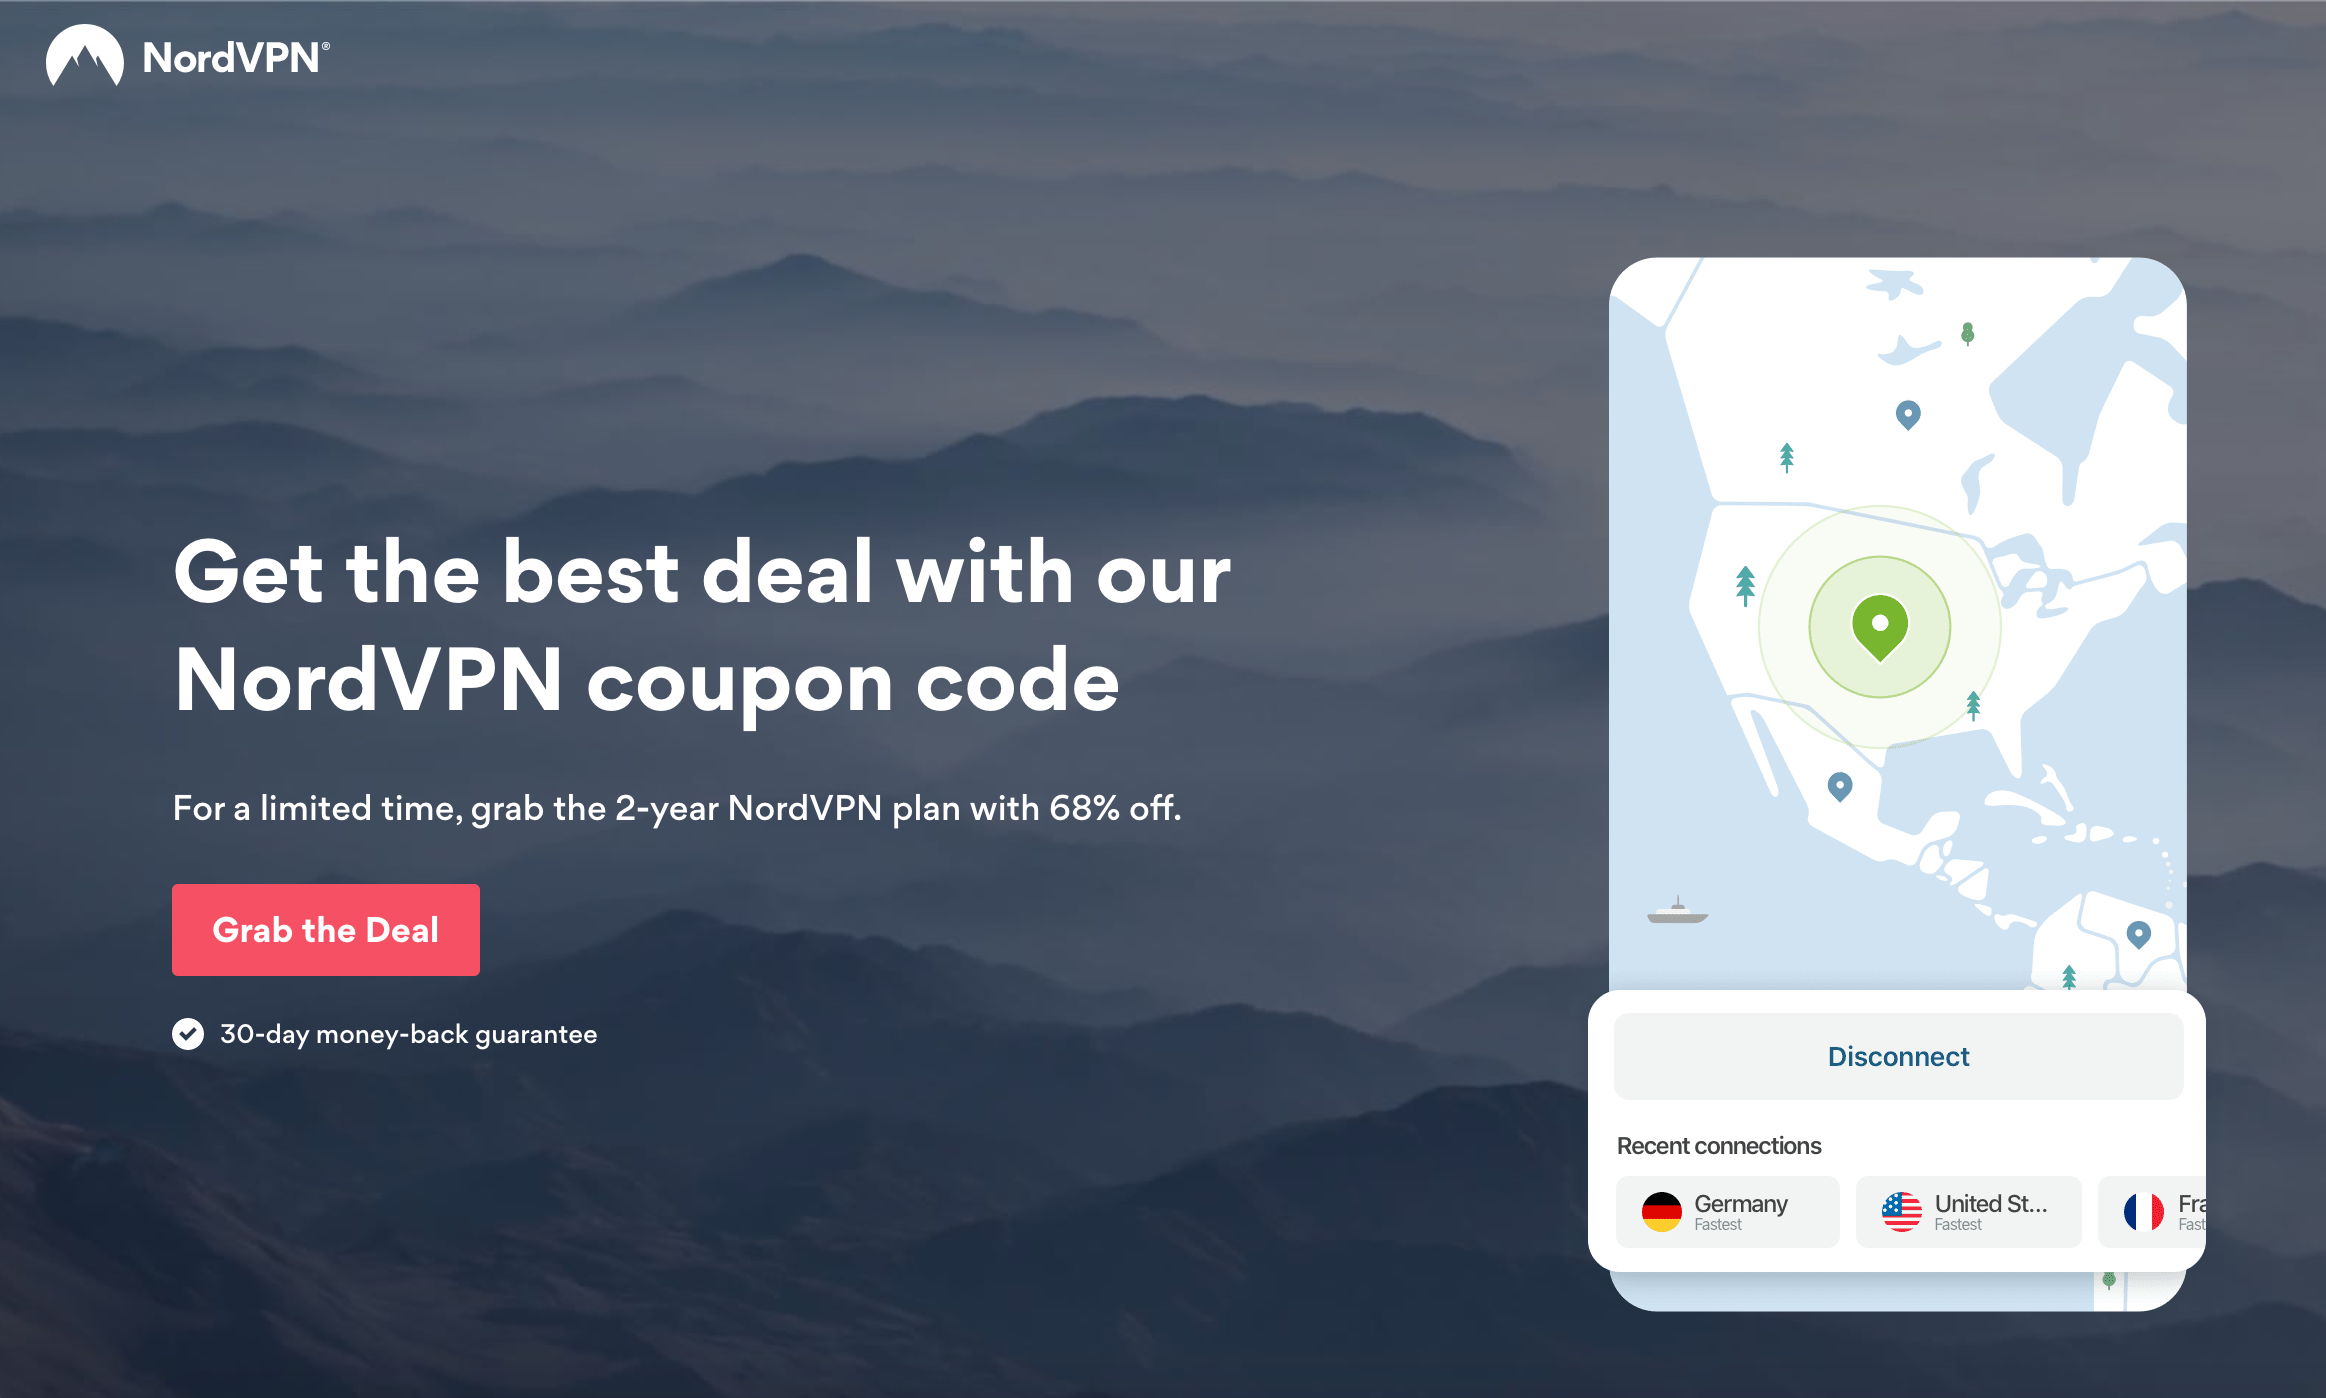 NordVPN is the best solution for better online privacy